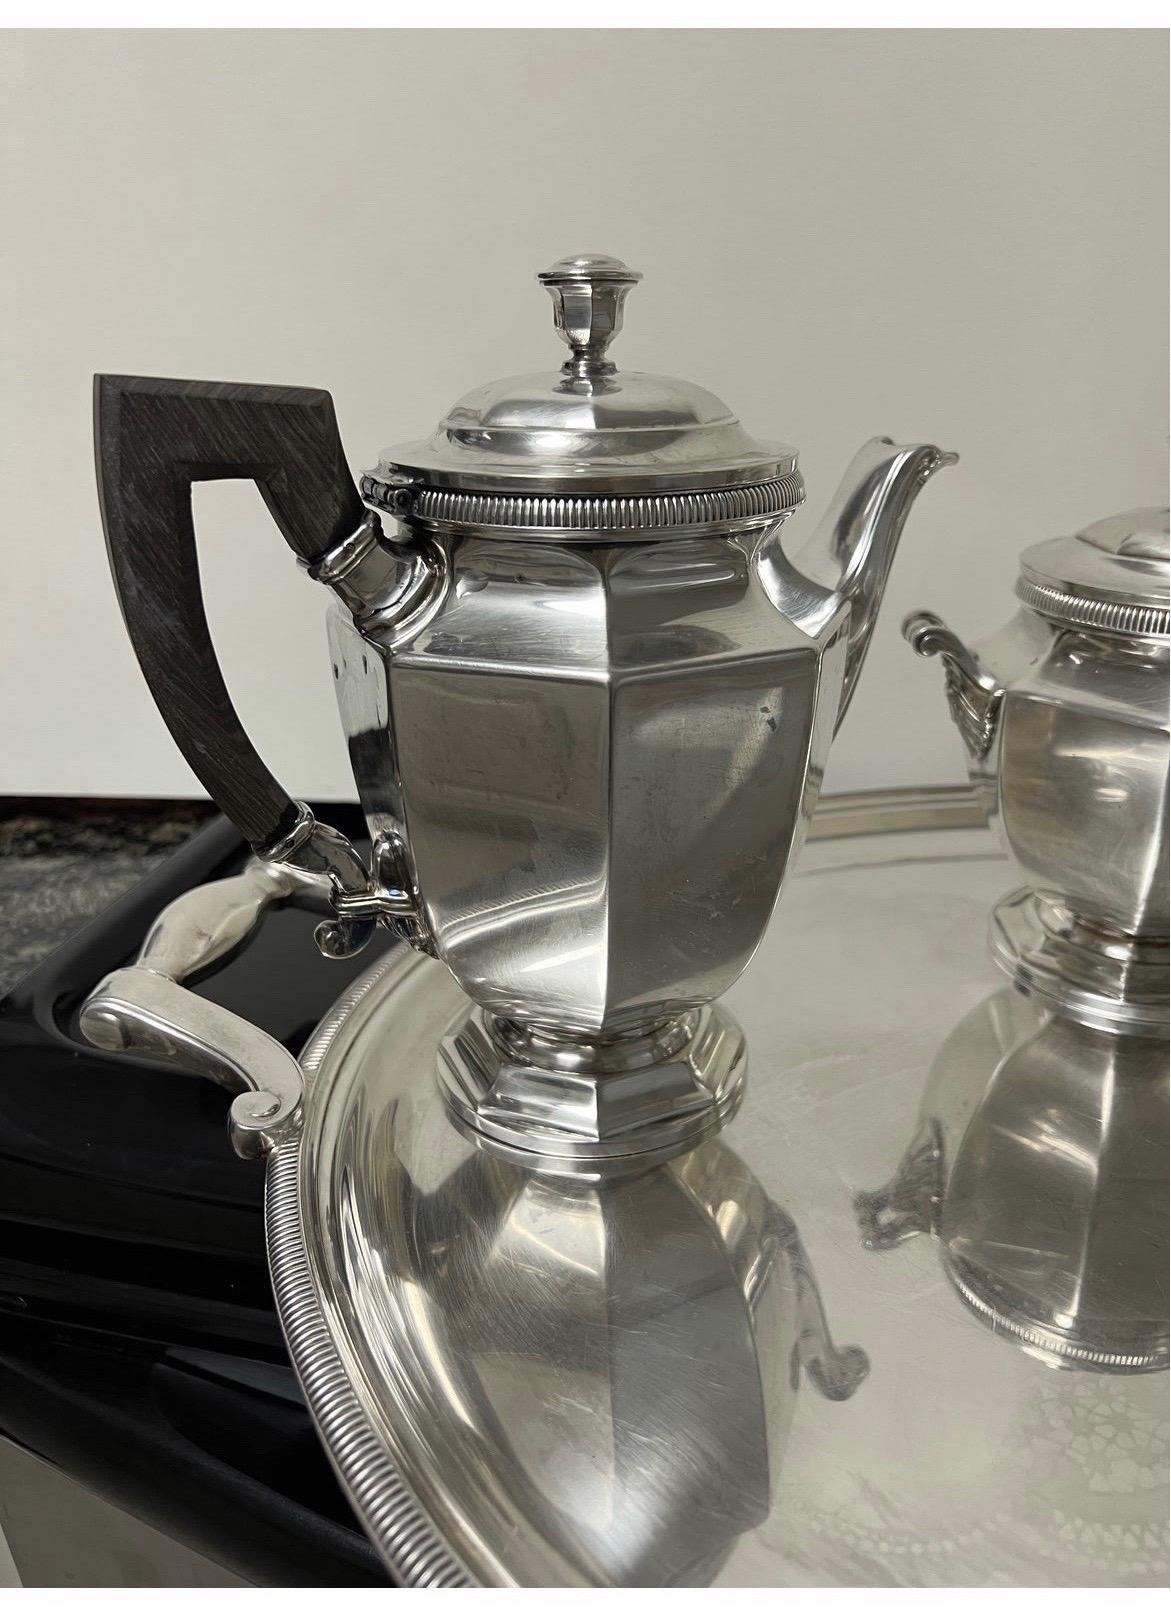 Beautiful 5 pc coffee and tea set including oversized butler’s tray. 
Tray: 24.5” w x 16.5” d
Coffee Pot: 9.75” h x 7.875” d x 4.25” w
Teapot: 8” h x 8” d x 4.5” w
Sugar bowl: 6.5” h x 6.25” w 
Creamer: 5.25” h x 4.75” d.